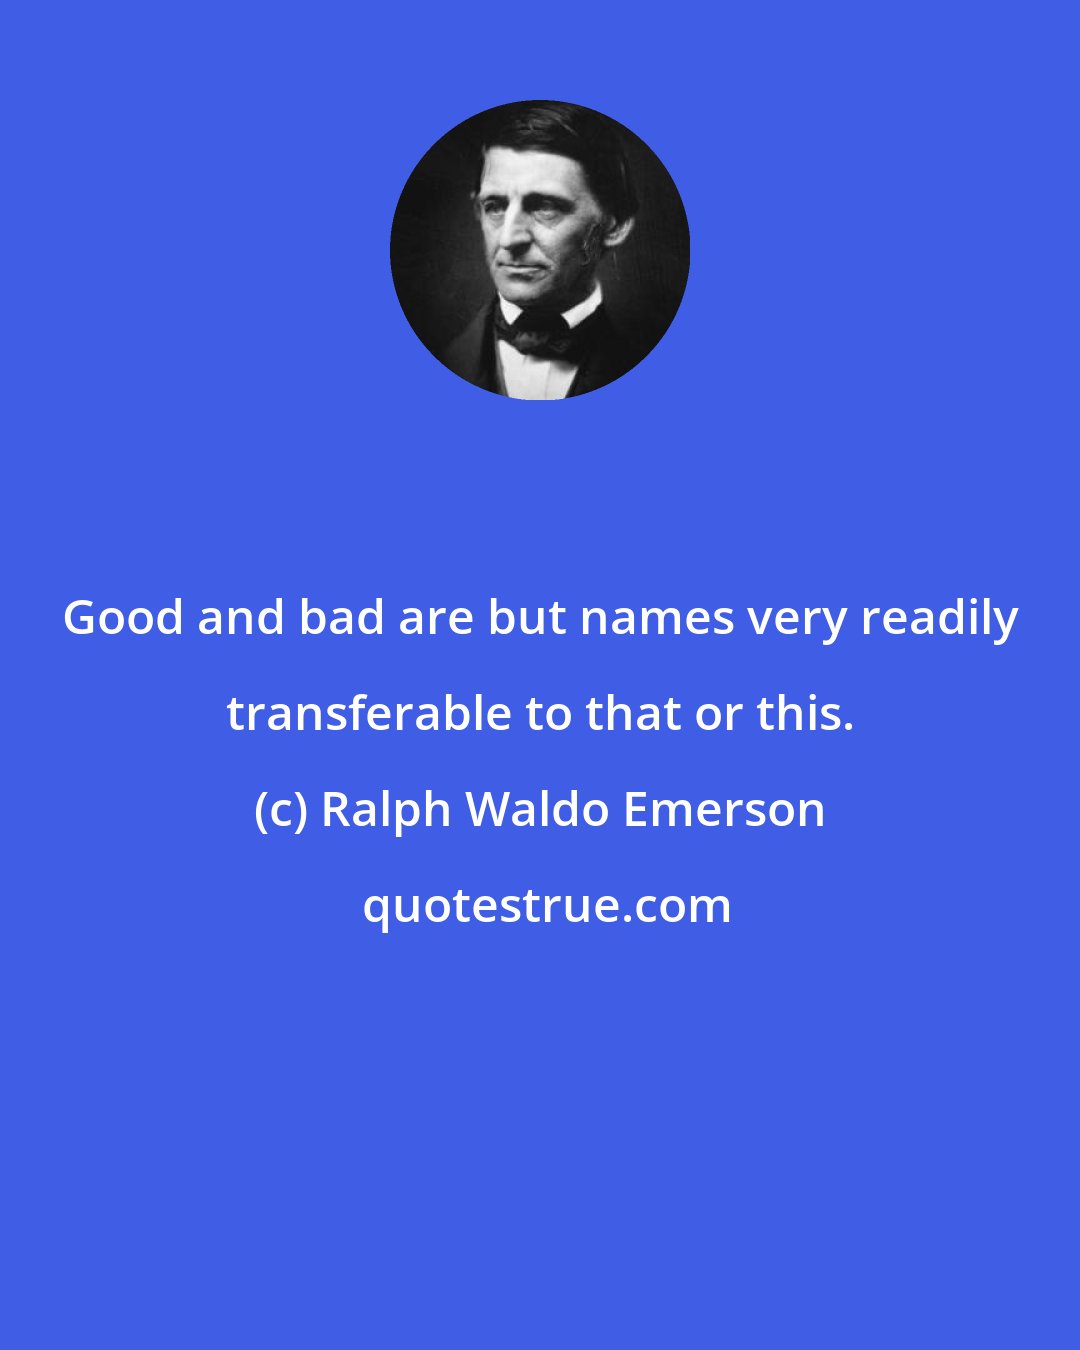 Ralph Waldo Emerson: Good and bad are but names very readily transferable to that or this.